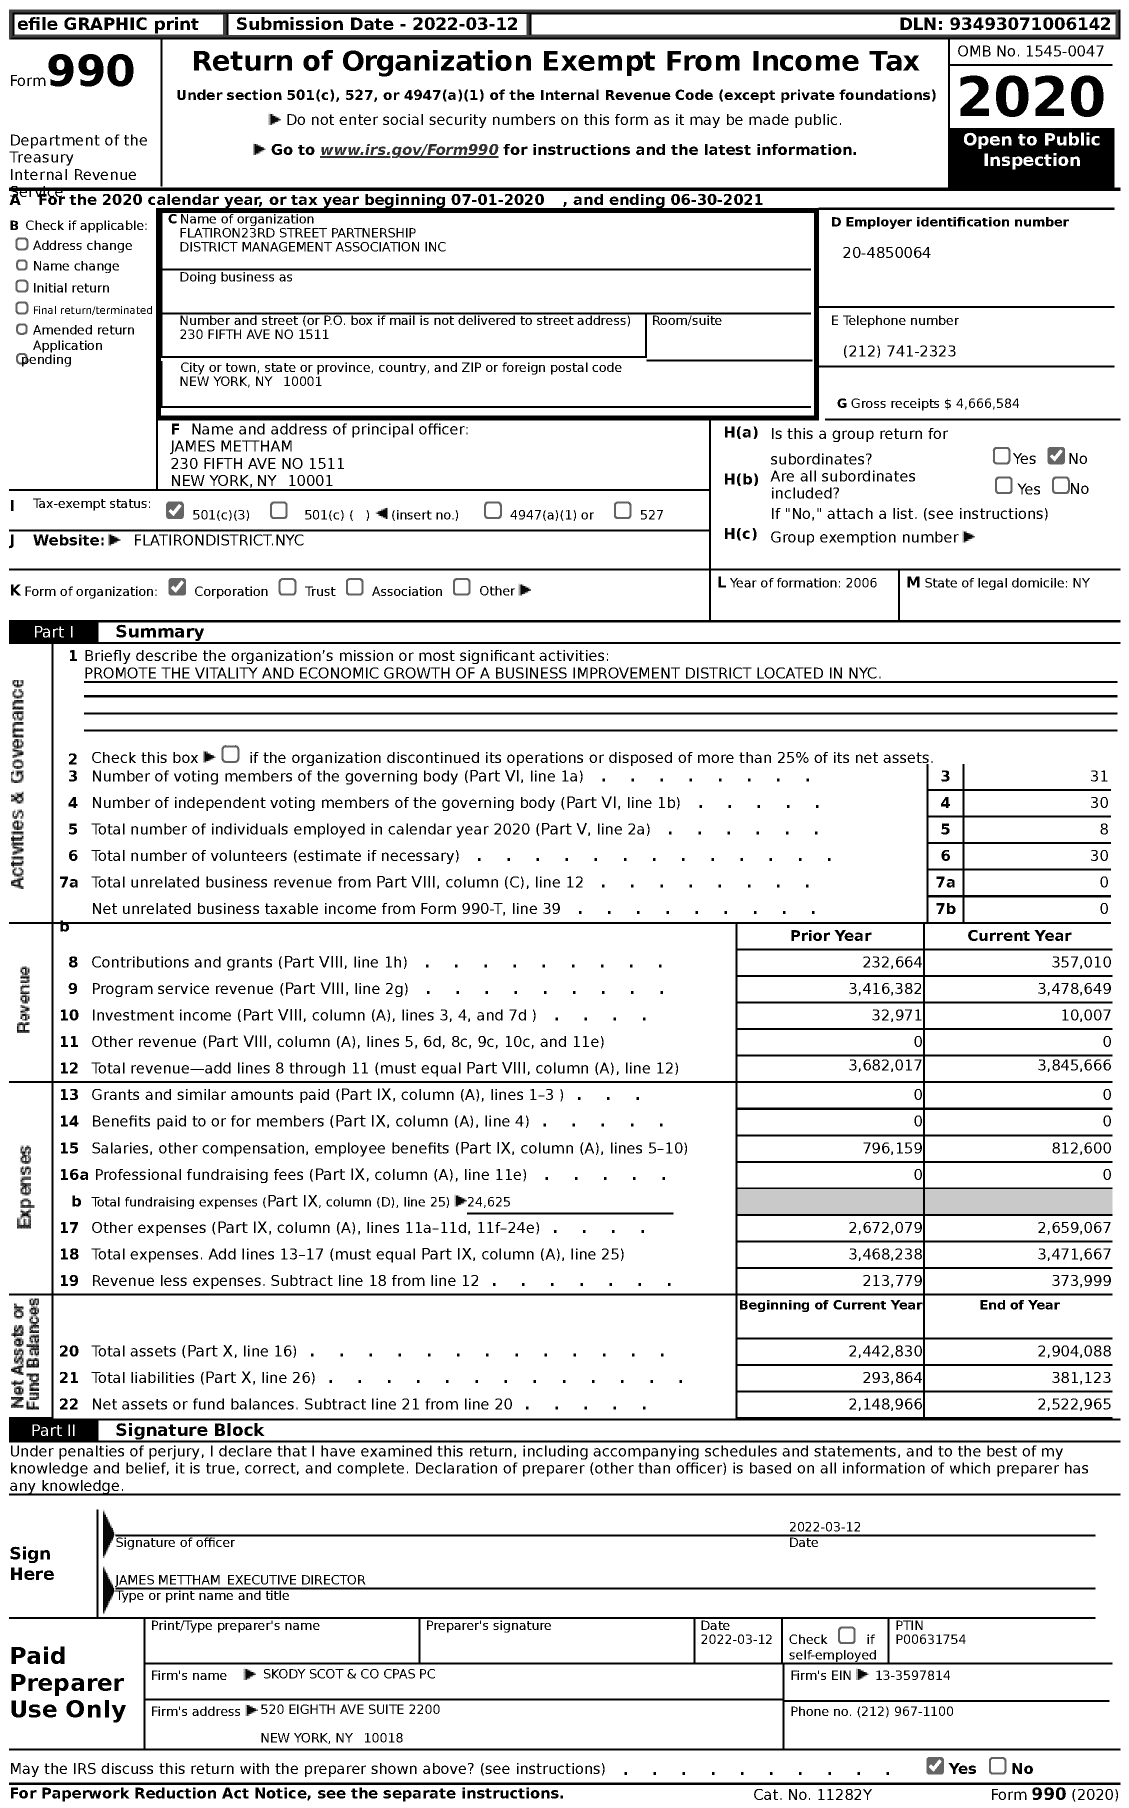 Image of first page of 2020 Form 990 for Flatiron23rd Street Partnership District Management Association